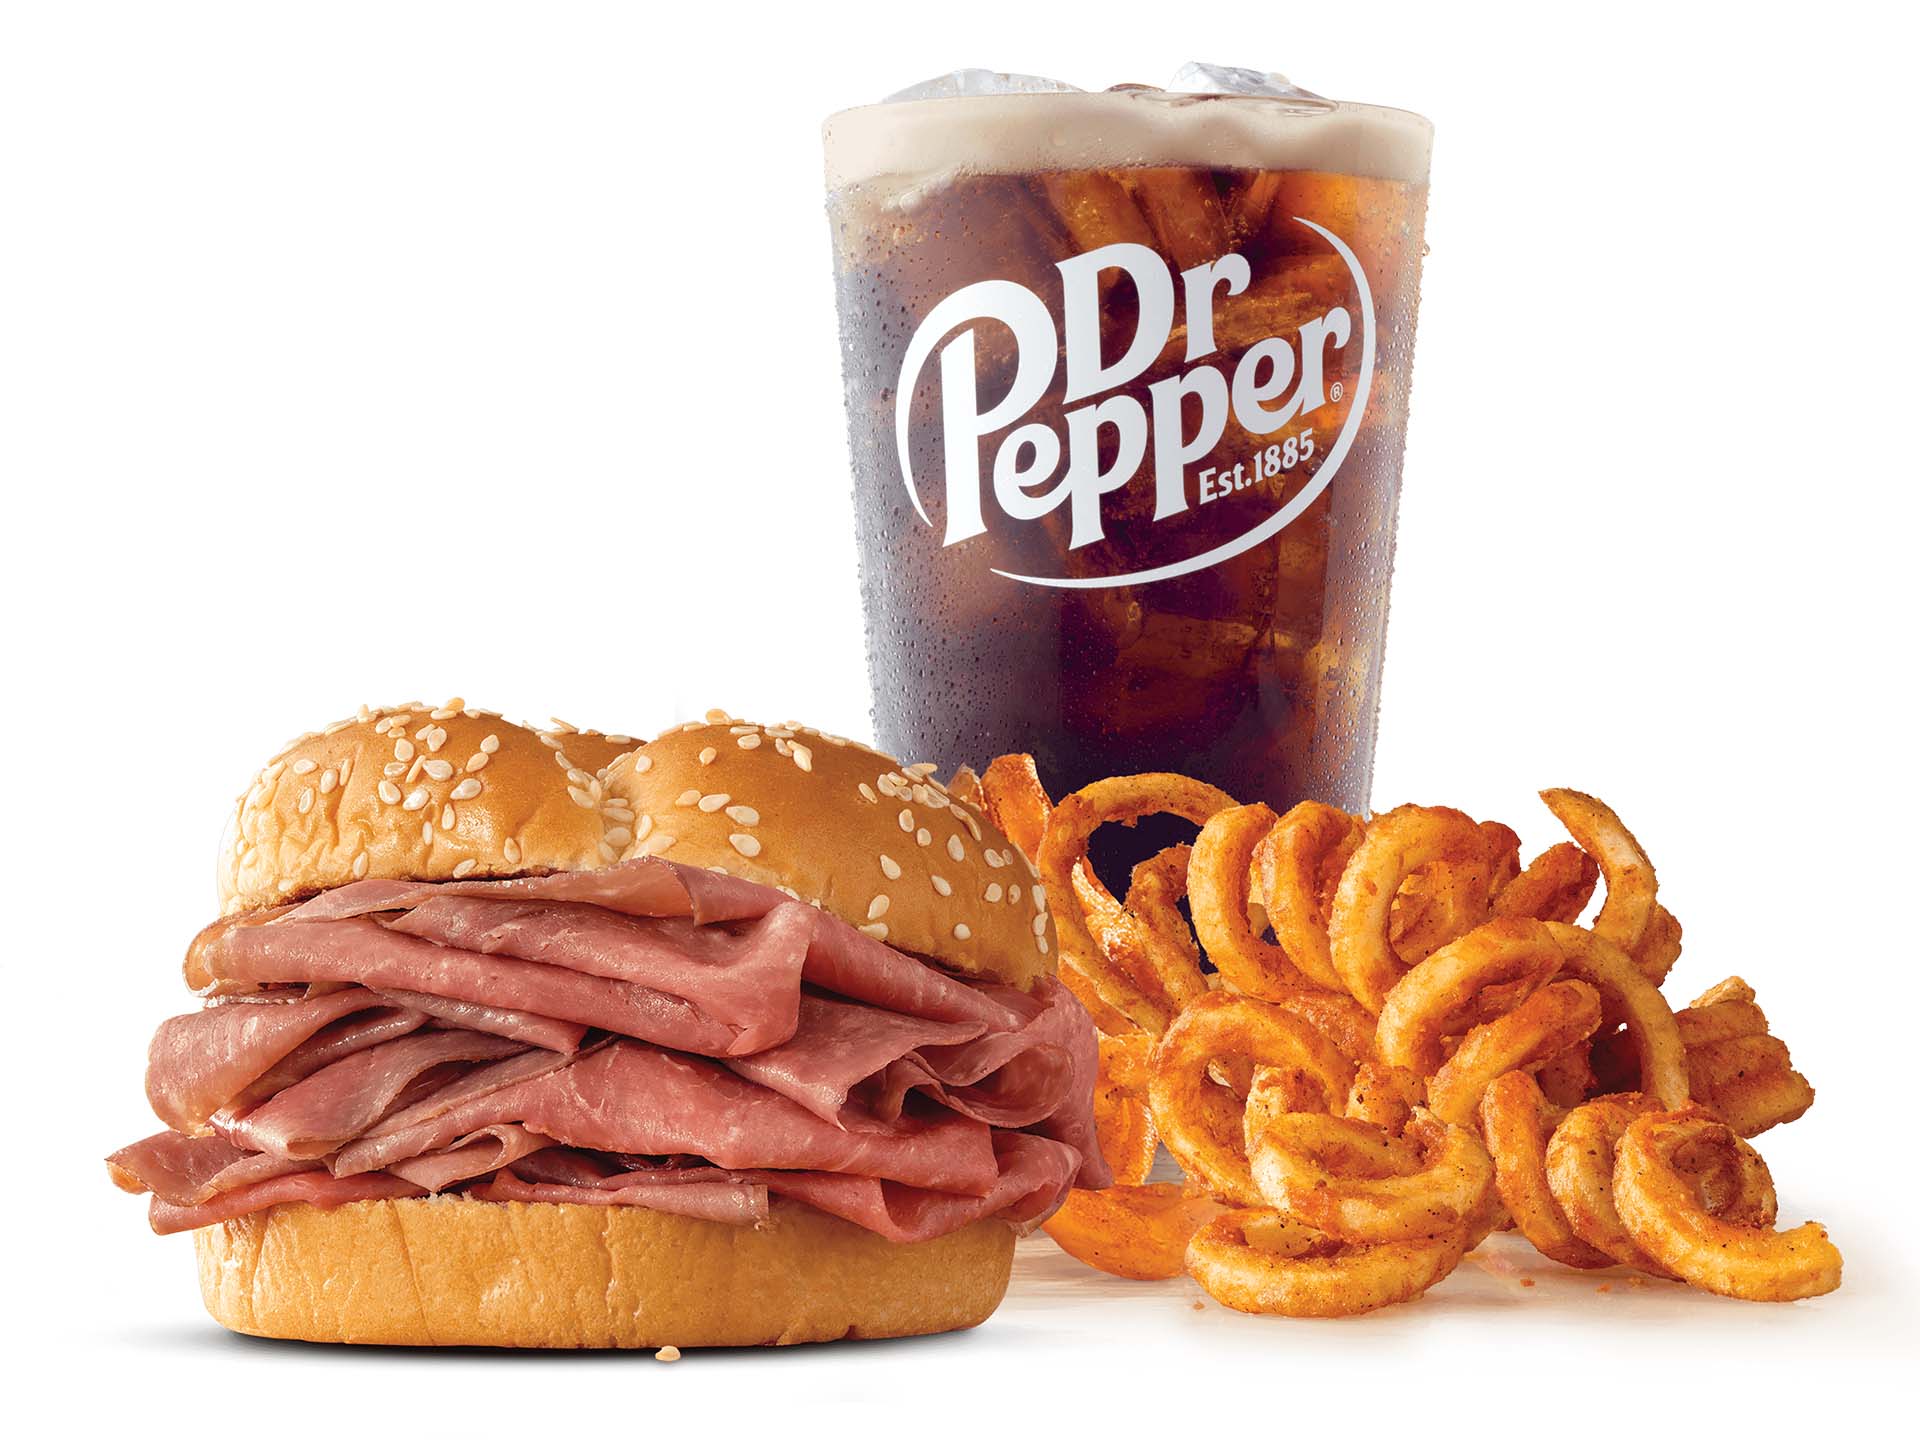 Arby's classic roast beef meal in New Brunswick, NJ